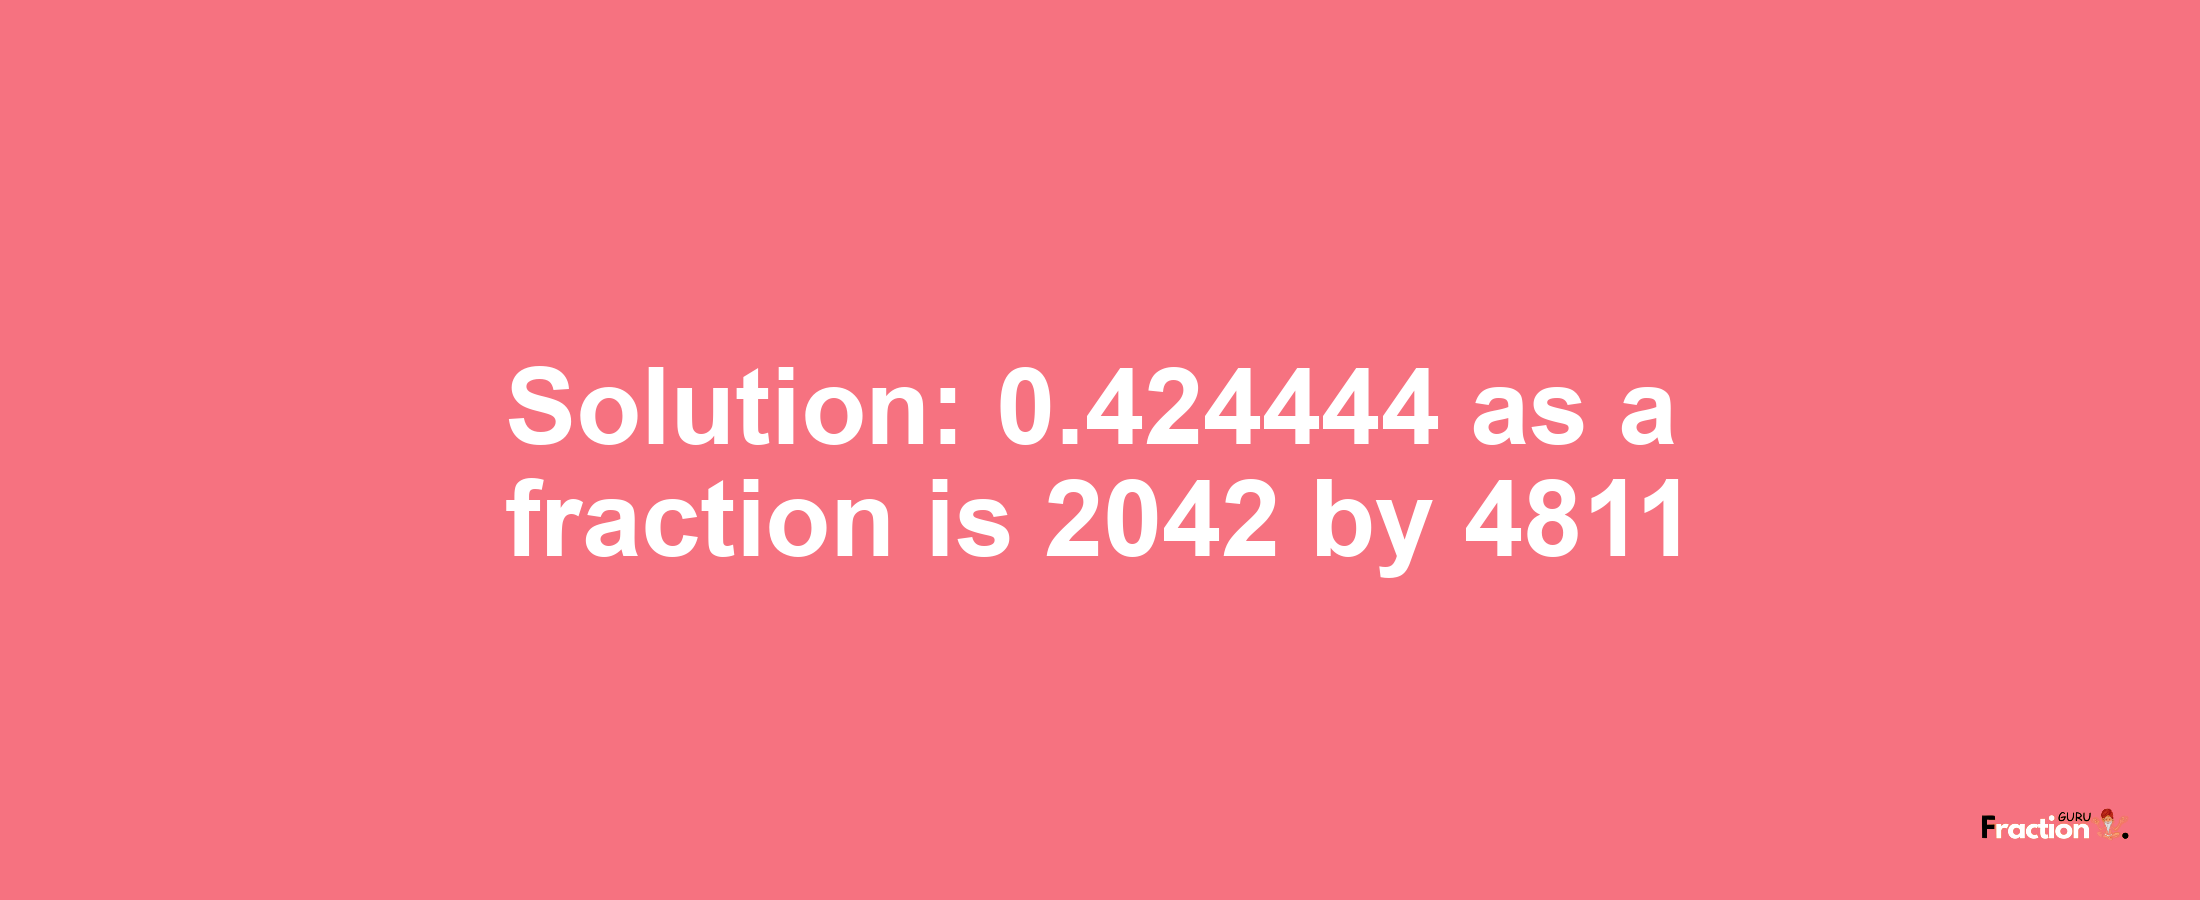 Solution:0.424444 as a fraction is 2042/4811